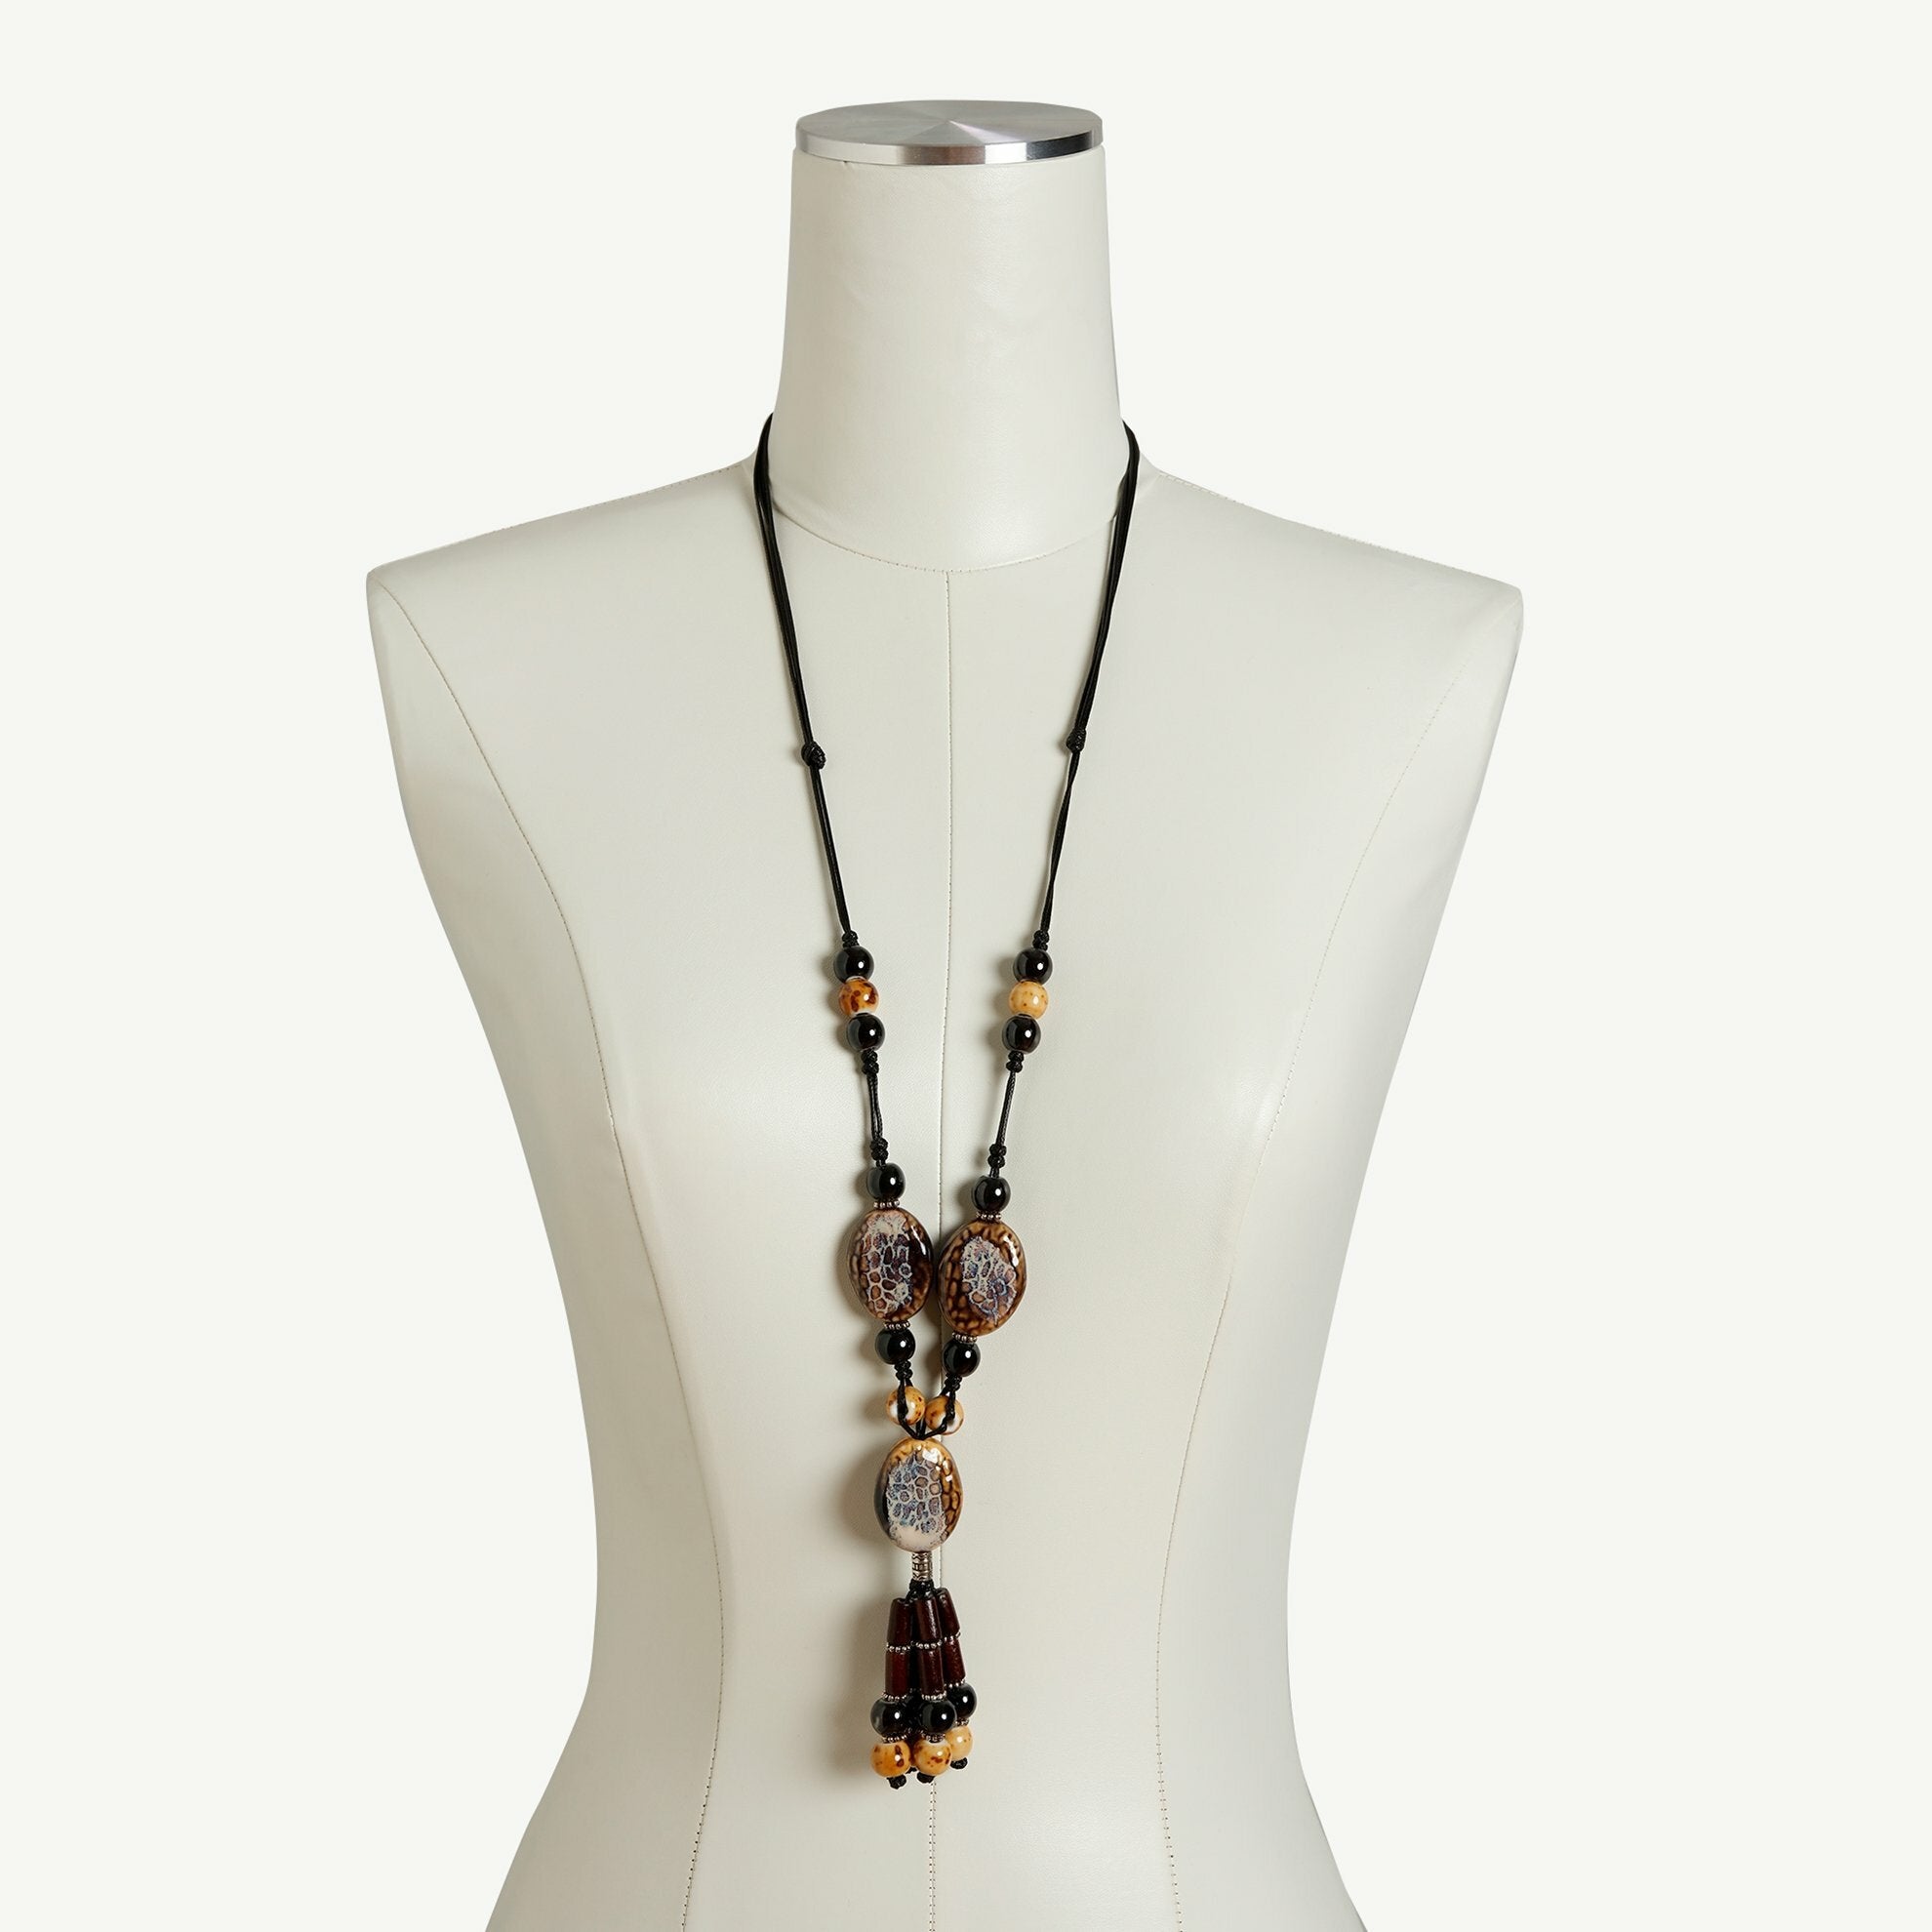 Natural Stone Necklace on Dress Form